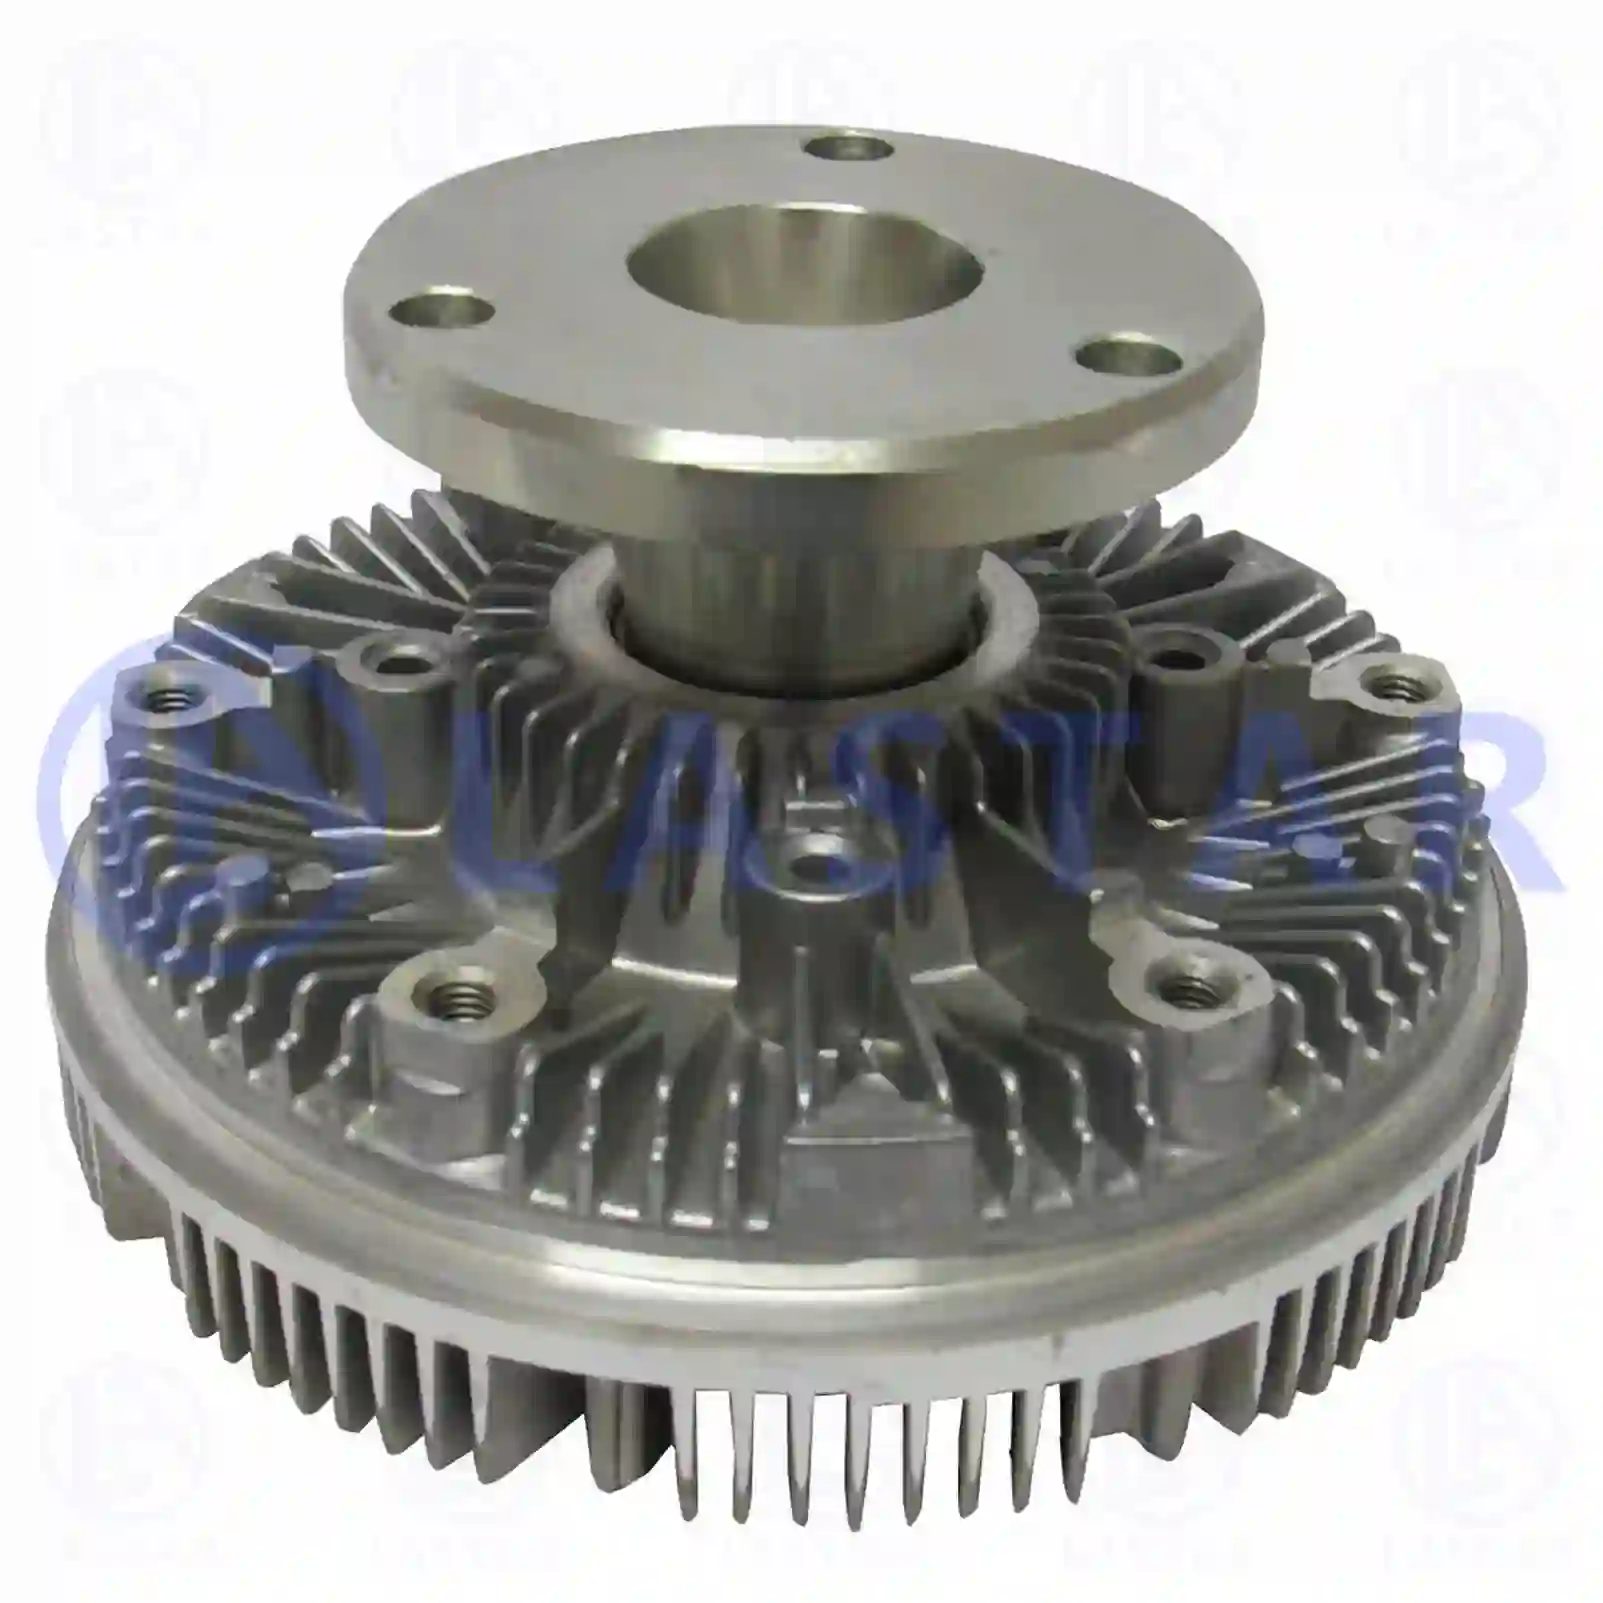 Fan clutch, 77709265, 504029738 ||  77709265 Lastar Spare Part | Truck Spare Parts, Auotomotive Spare Parts Fan clutch, 77709265, 504029738 ||  77709265 Lastar Spare Part | Truck Spare Parts, Auotomotive Spare Parts